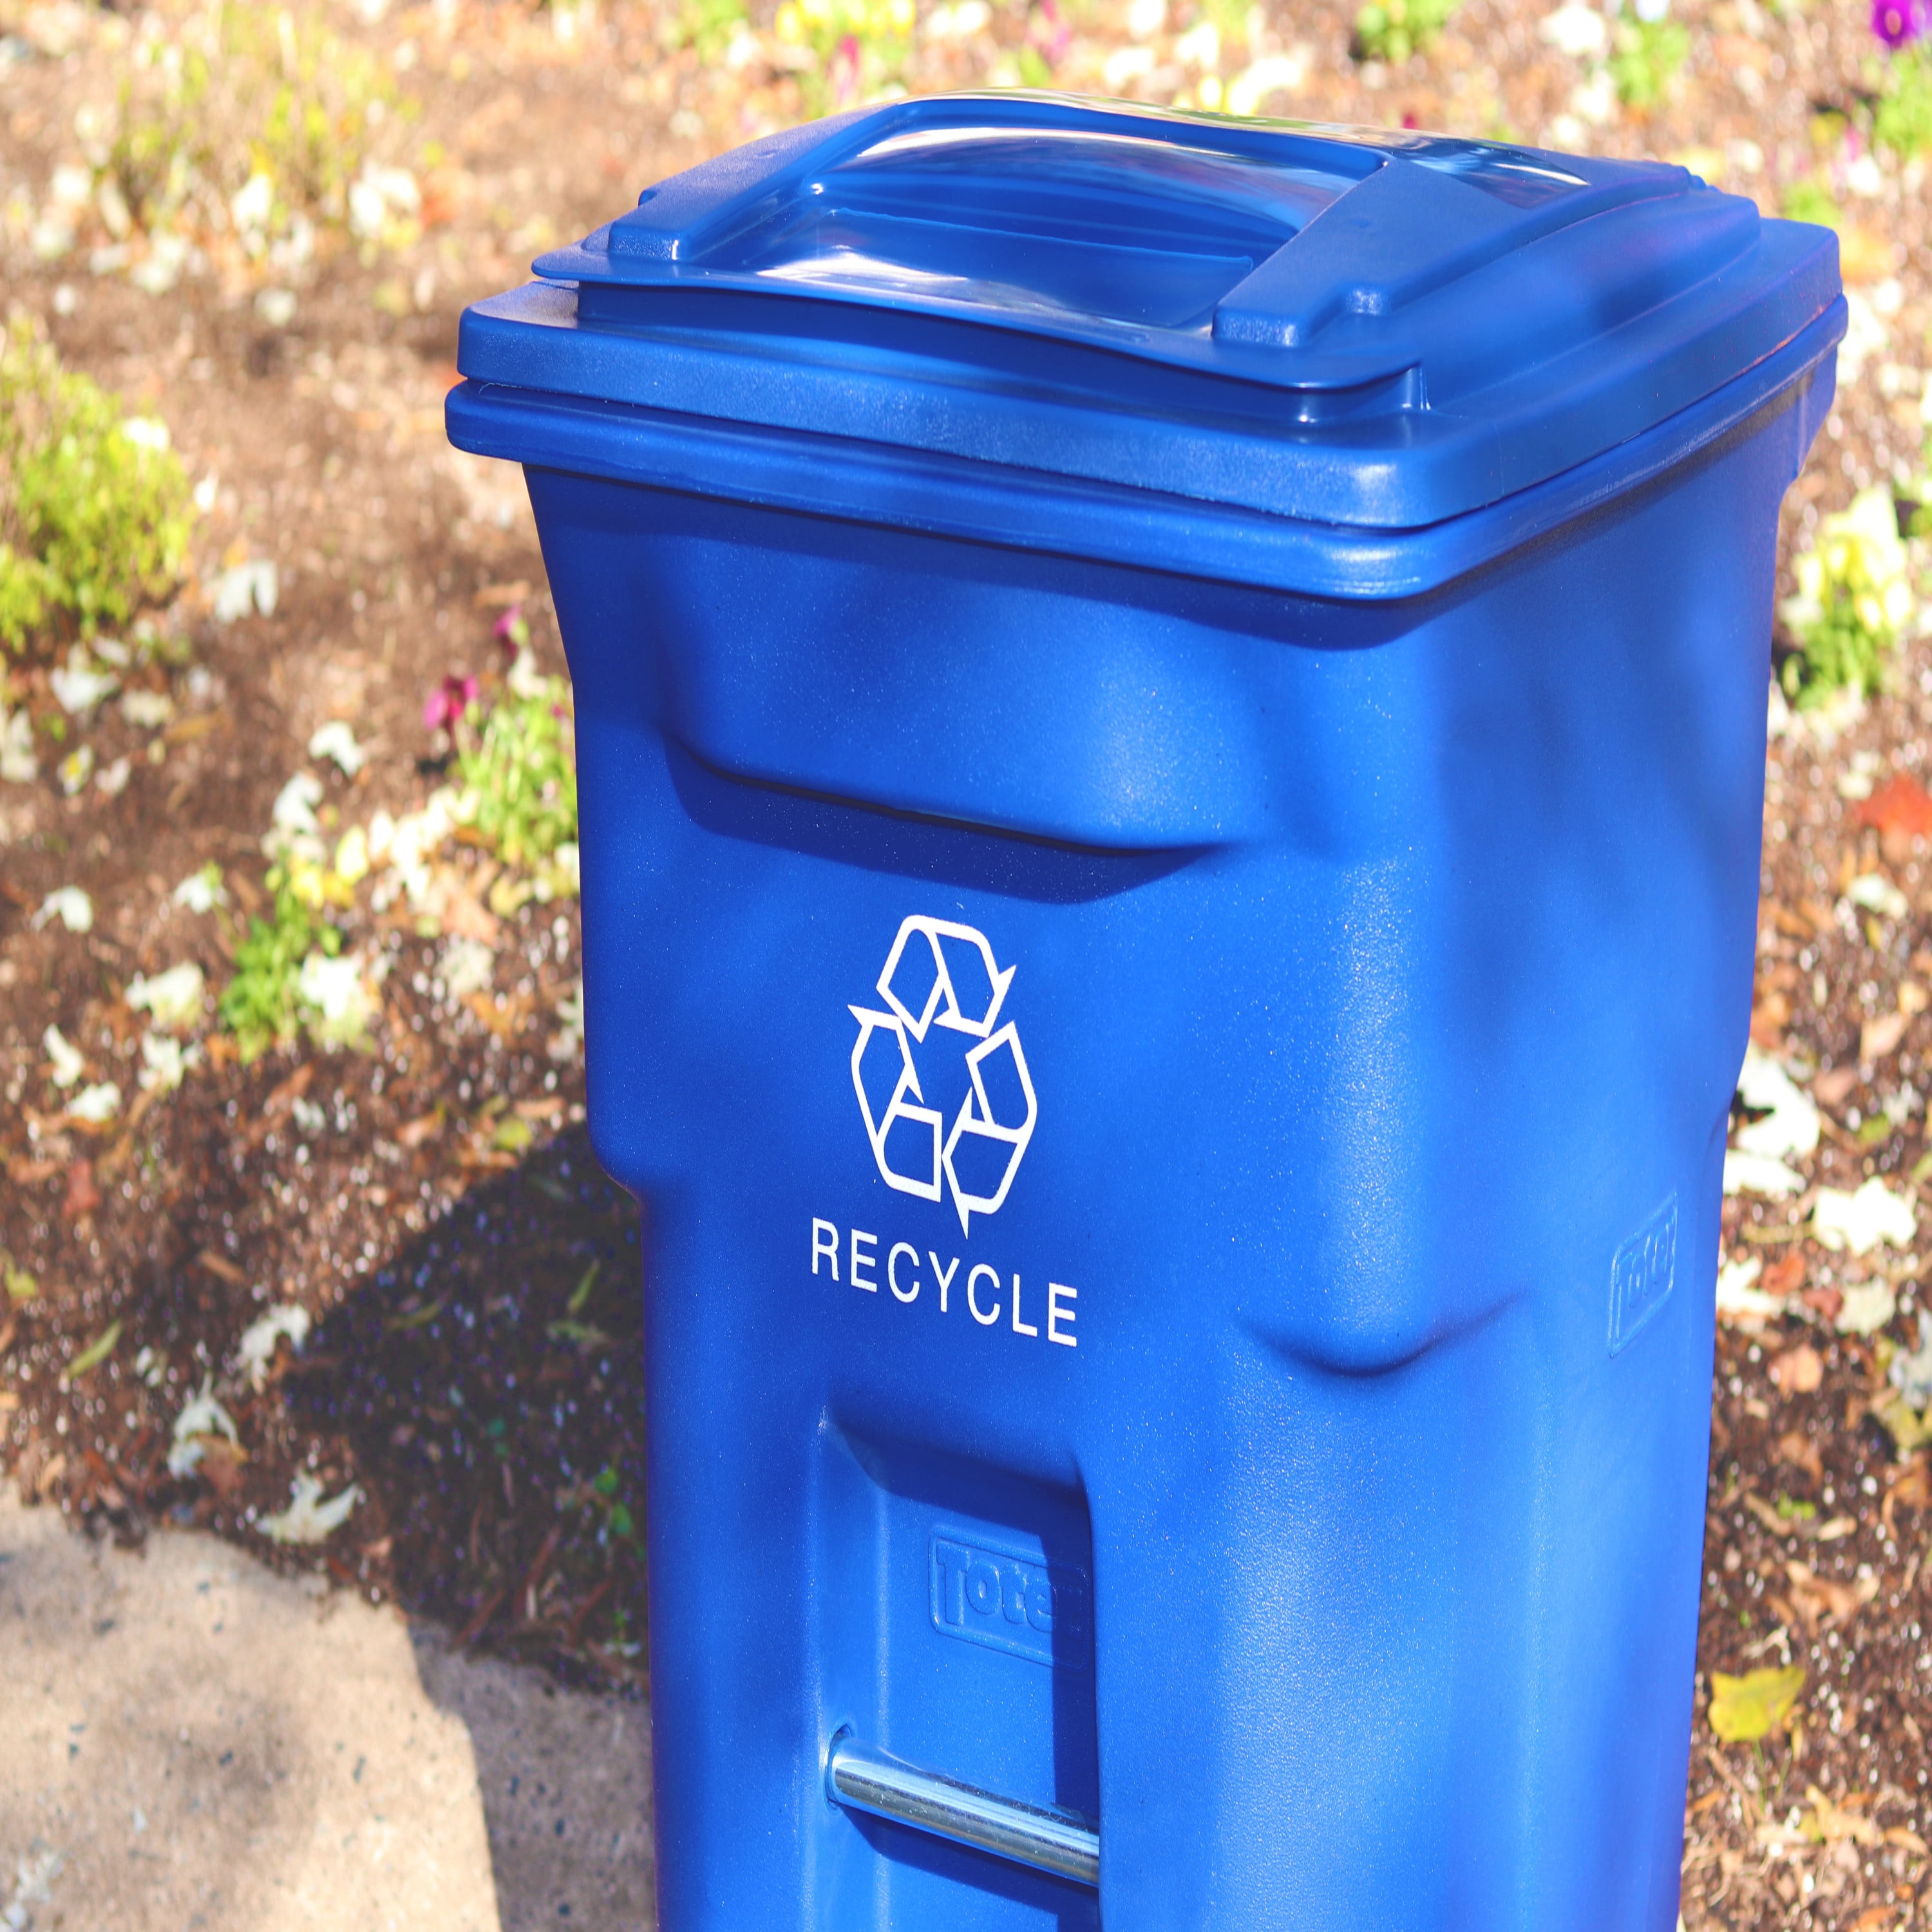 1039BL Blue Rollout Container 60 Gallon Trash Cans with Wheels